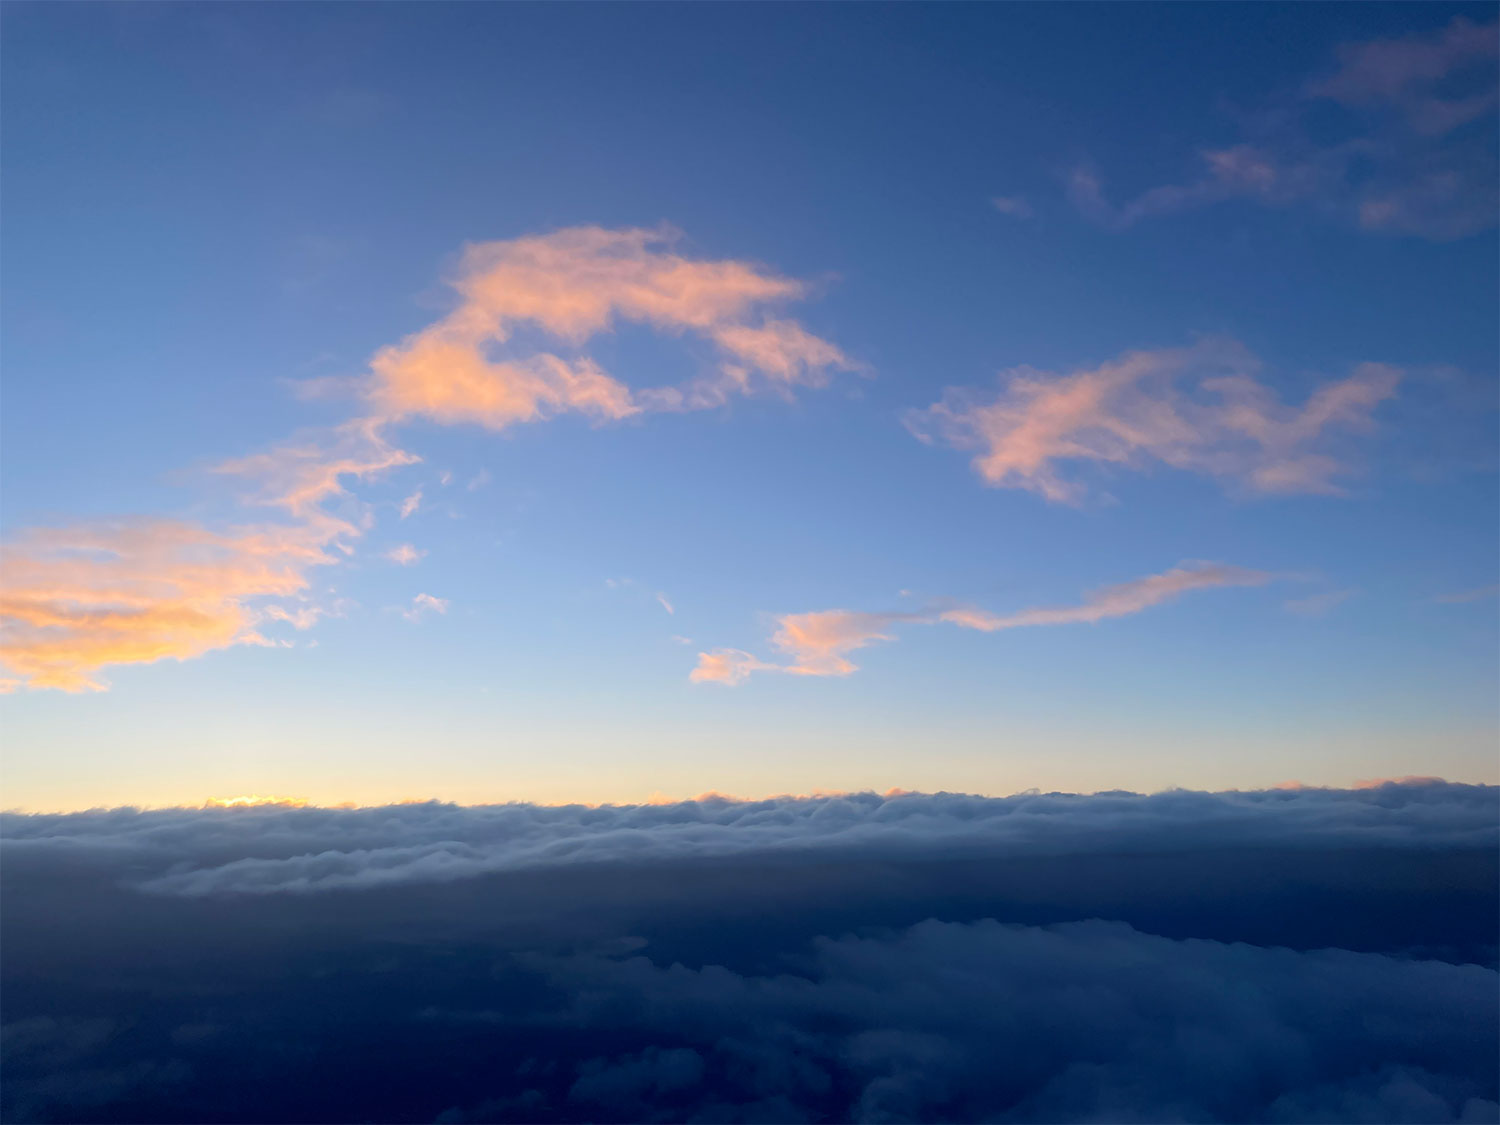 Looking east in the morning from above the clouds; that is, an image of the view out the window of an airplane, with a few wispy clouds pale pink above the gloaming